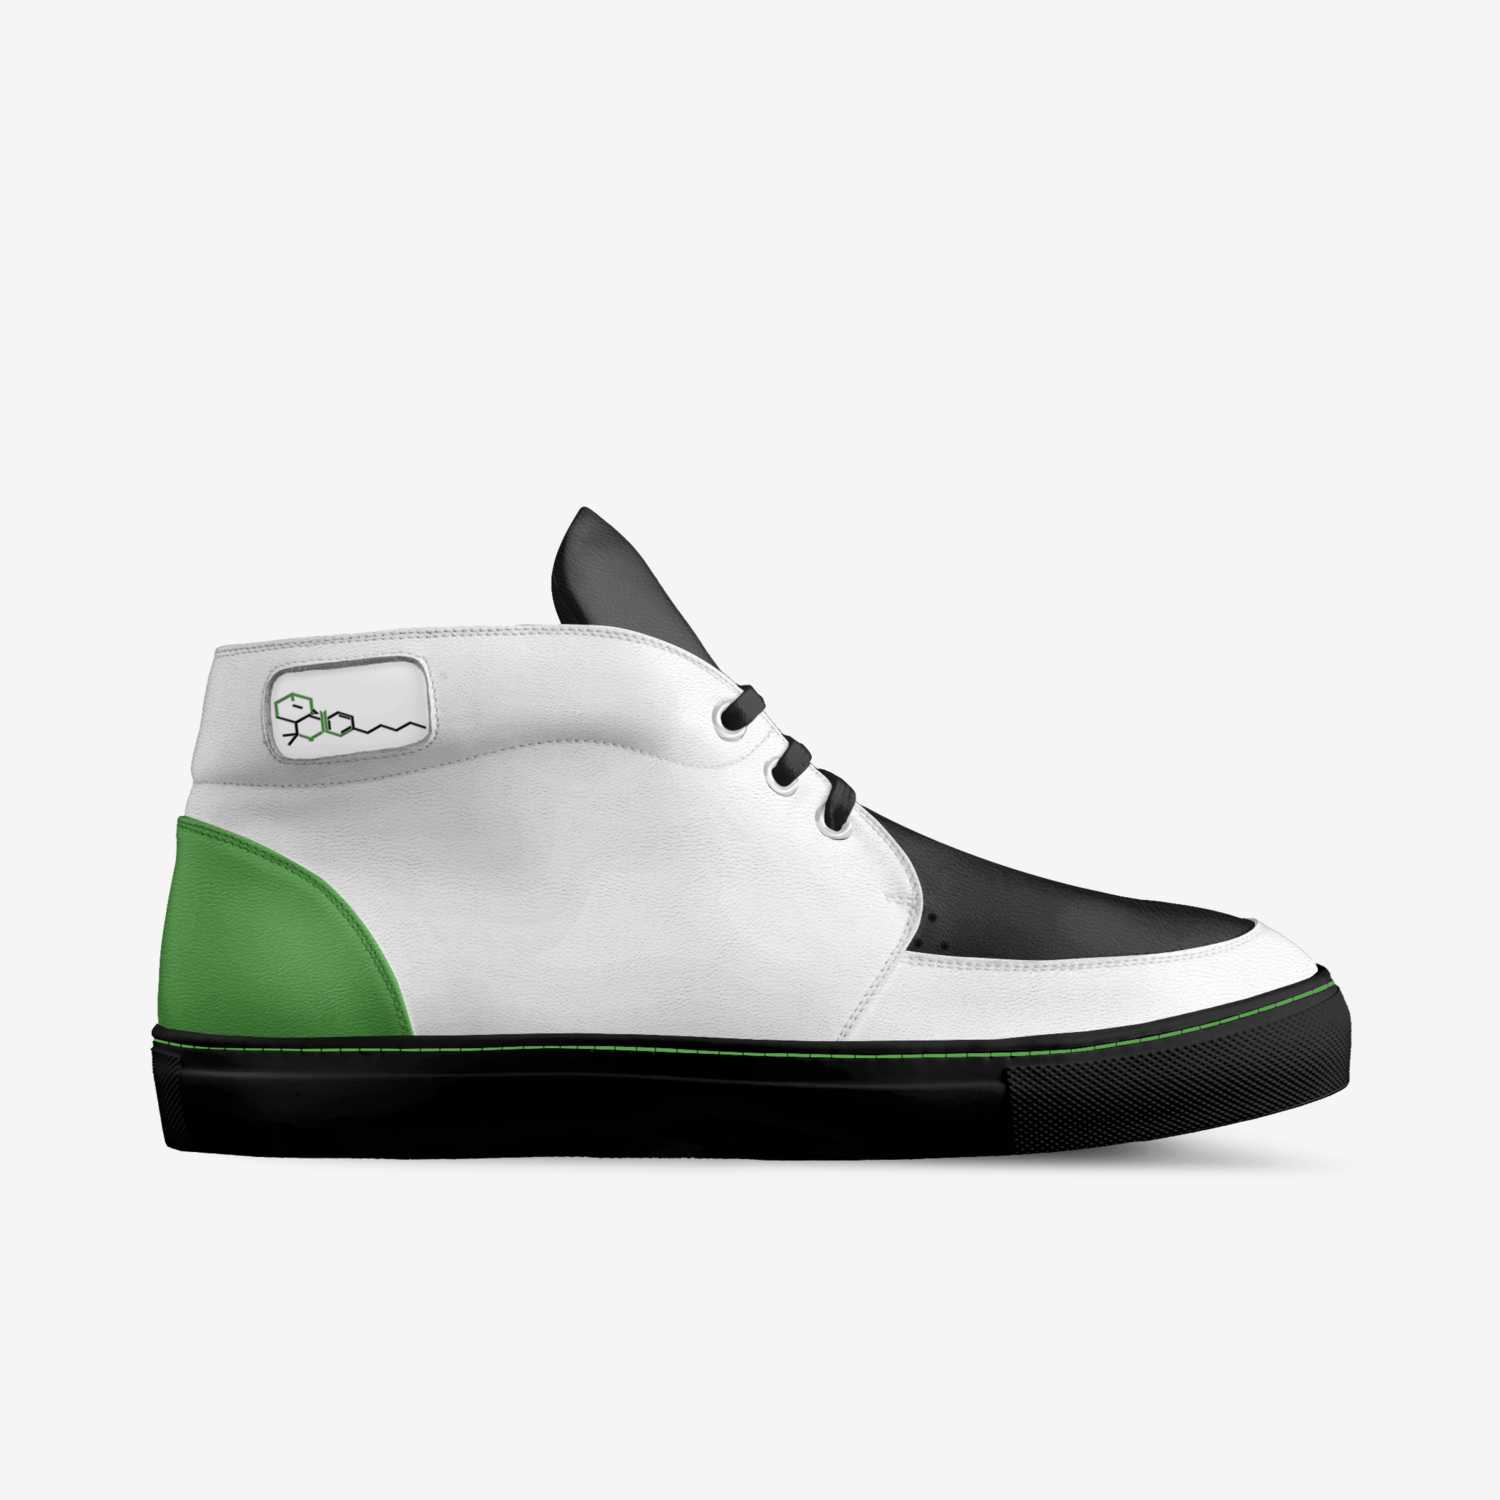 STICKMAN custom made in Italy shoes by Shachell Osbourne | Side view